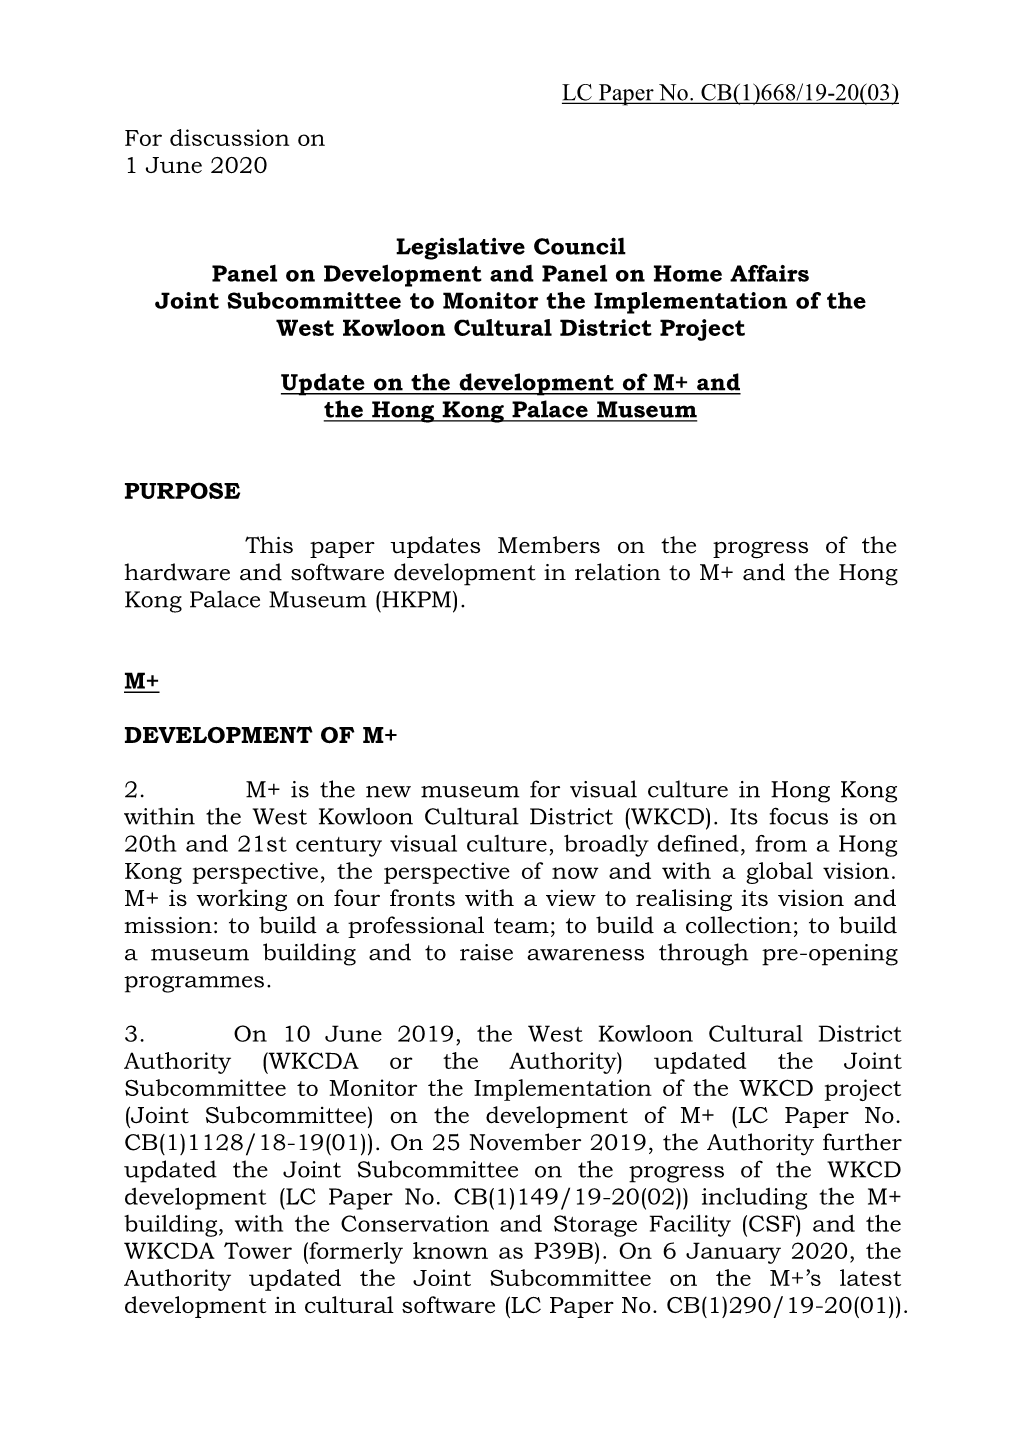 West Kowloon Cultural District Authority's Paper on Update on the Development of M+ and the Hong